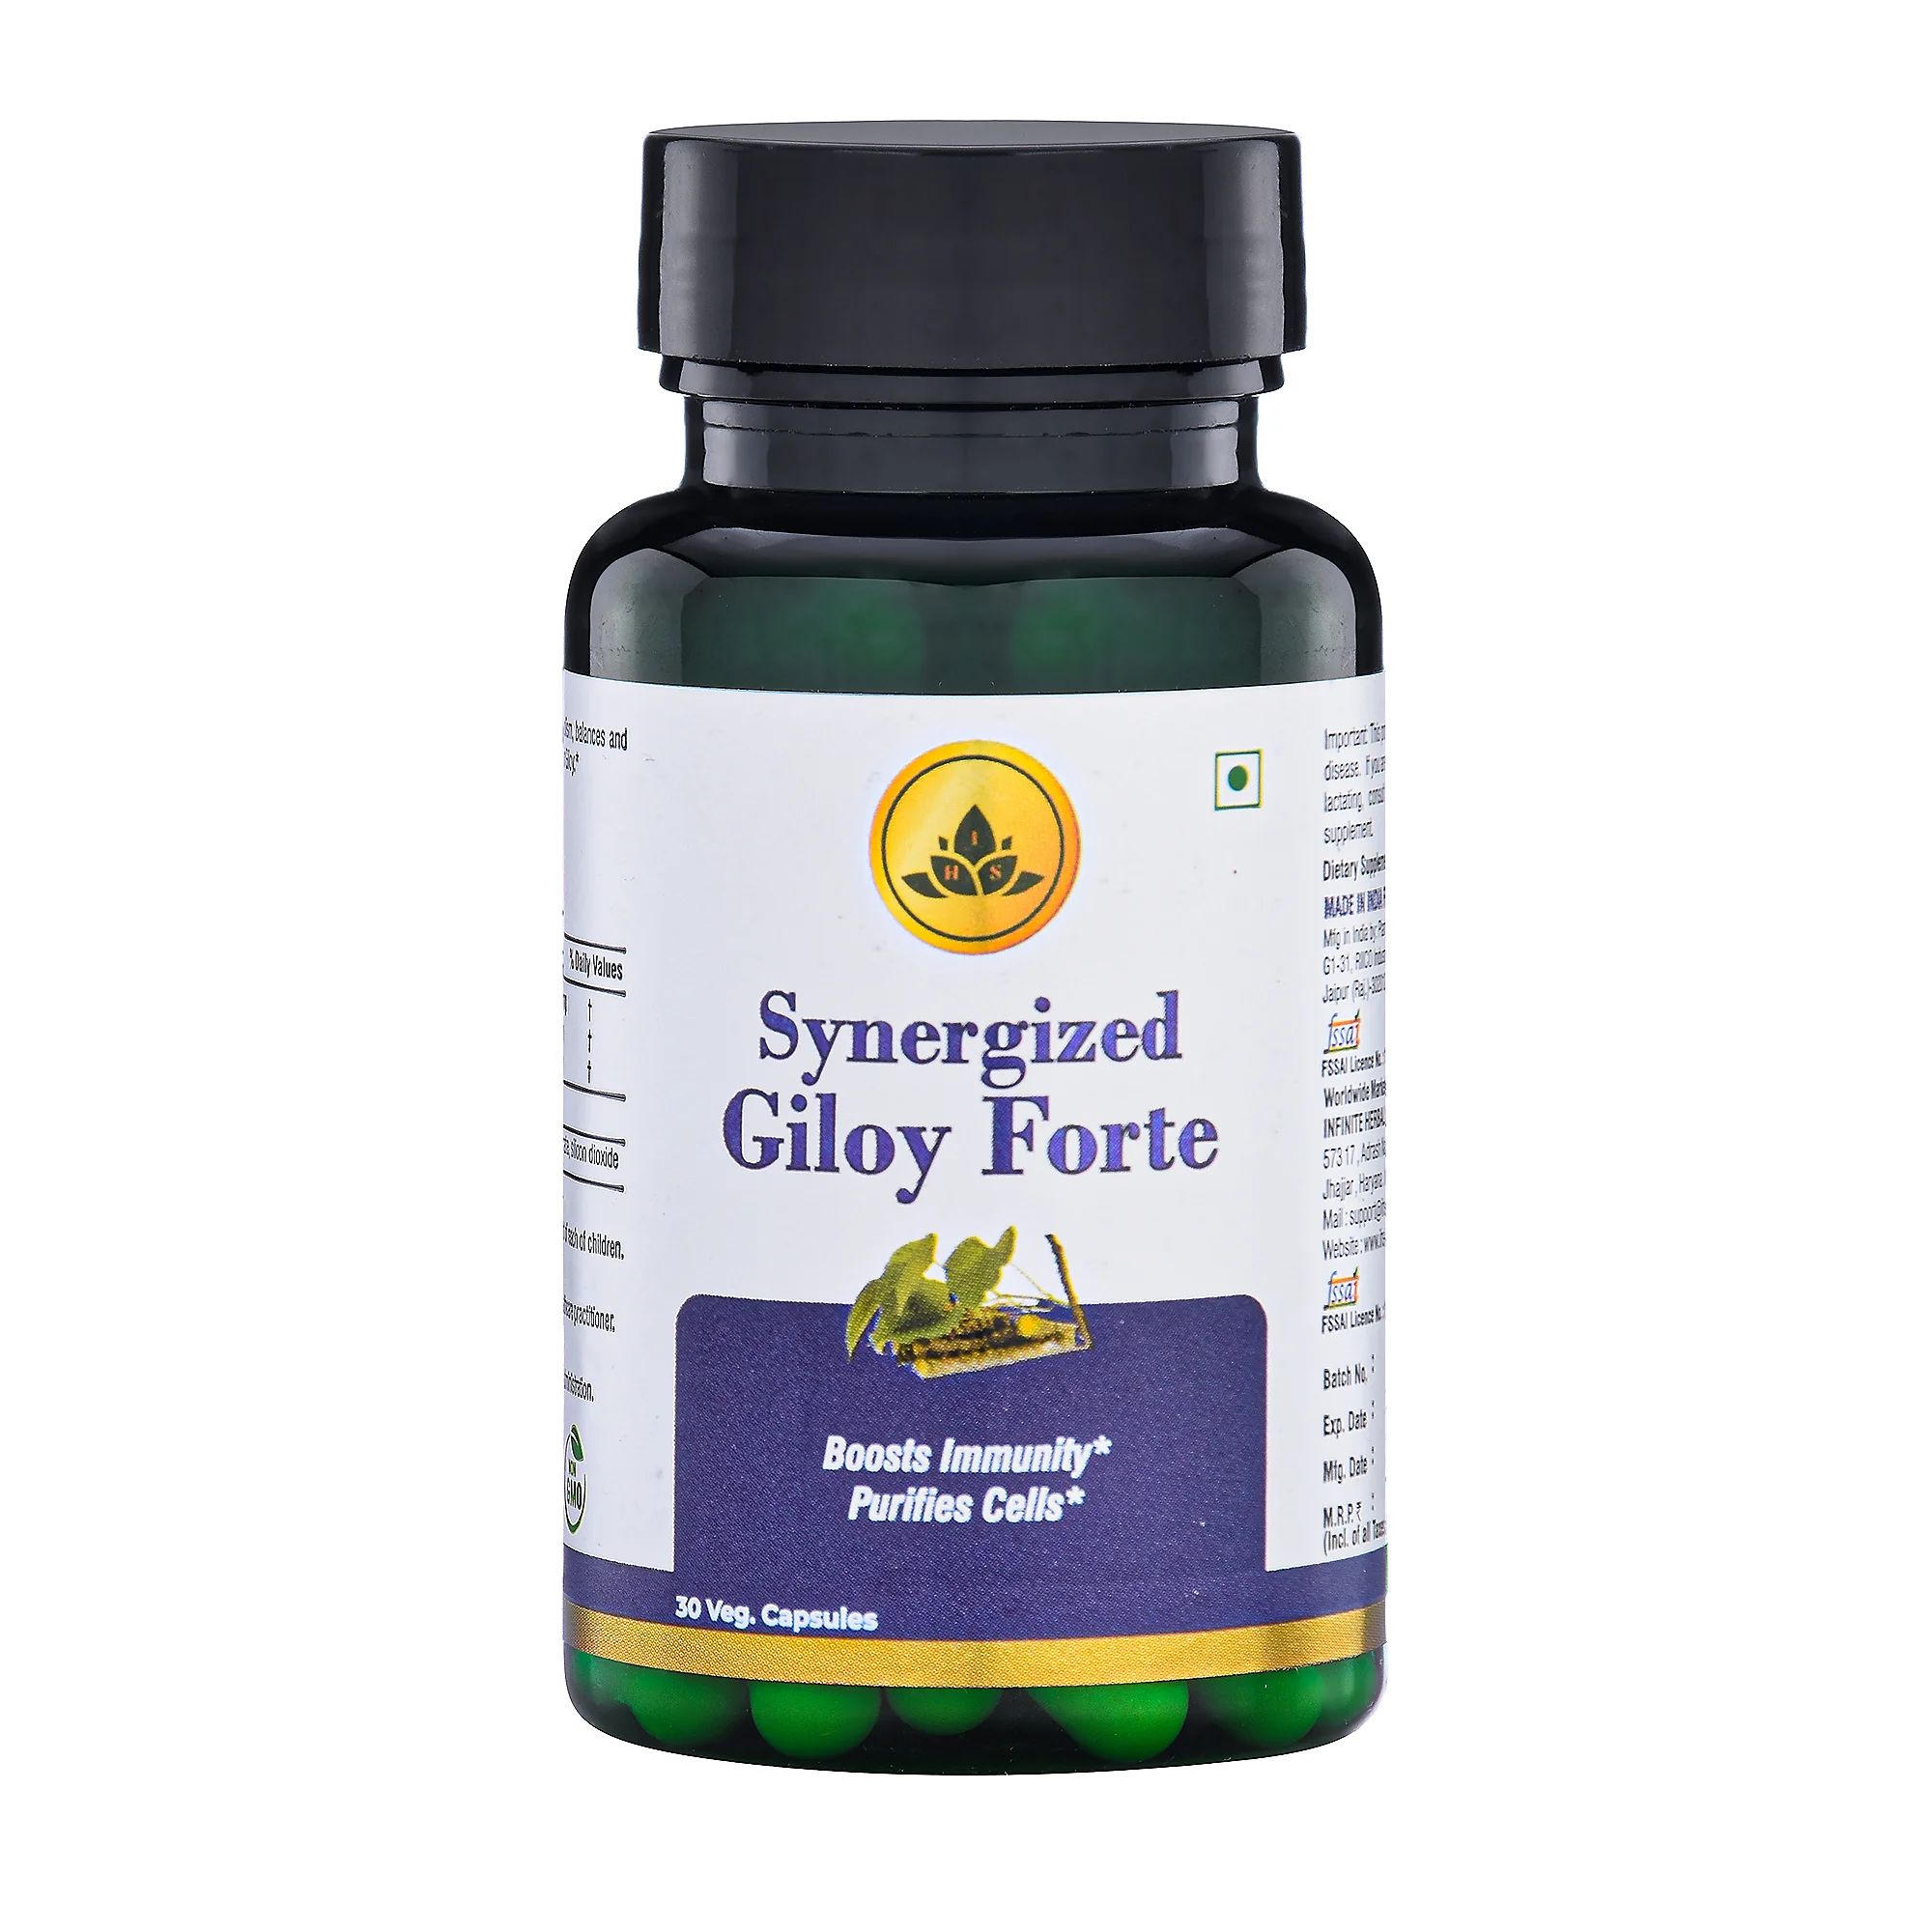 Synergized Giloy Forte Ayurvedic Herbs For Immune System